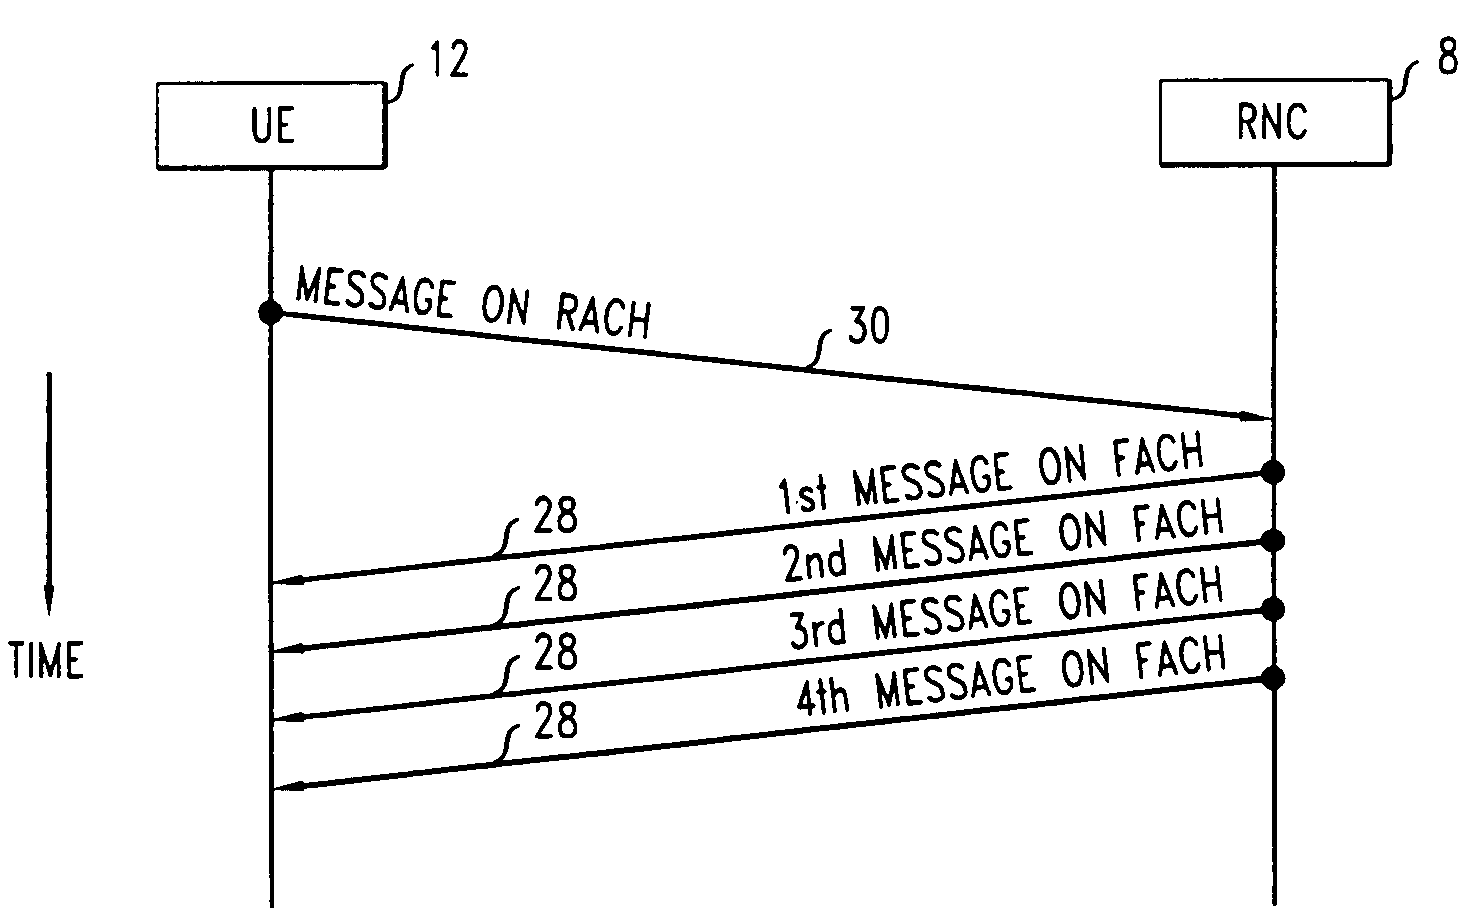 Transmitting a control message on a forward access channel (FACH) in a network for mobile telecommunications